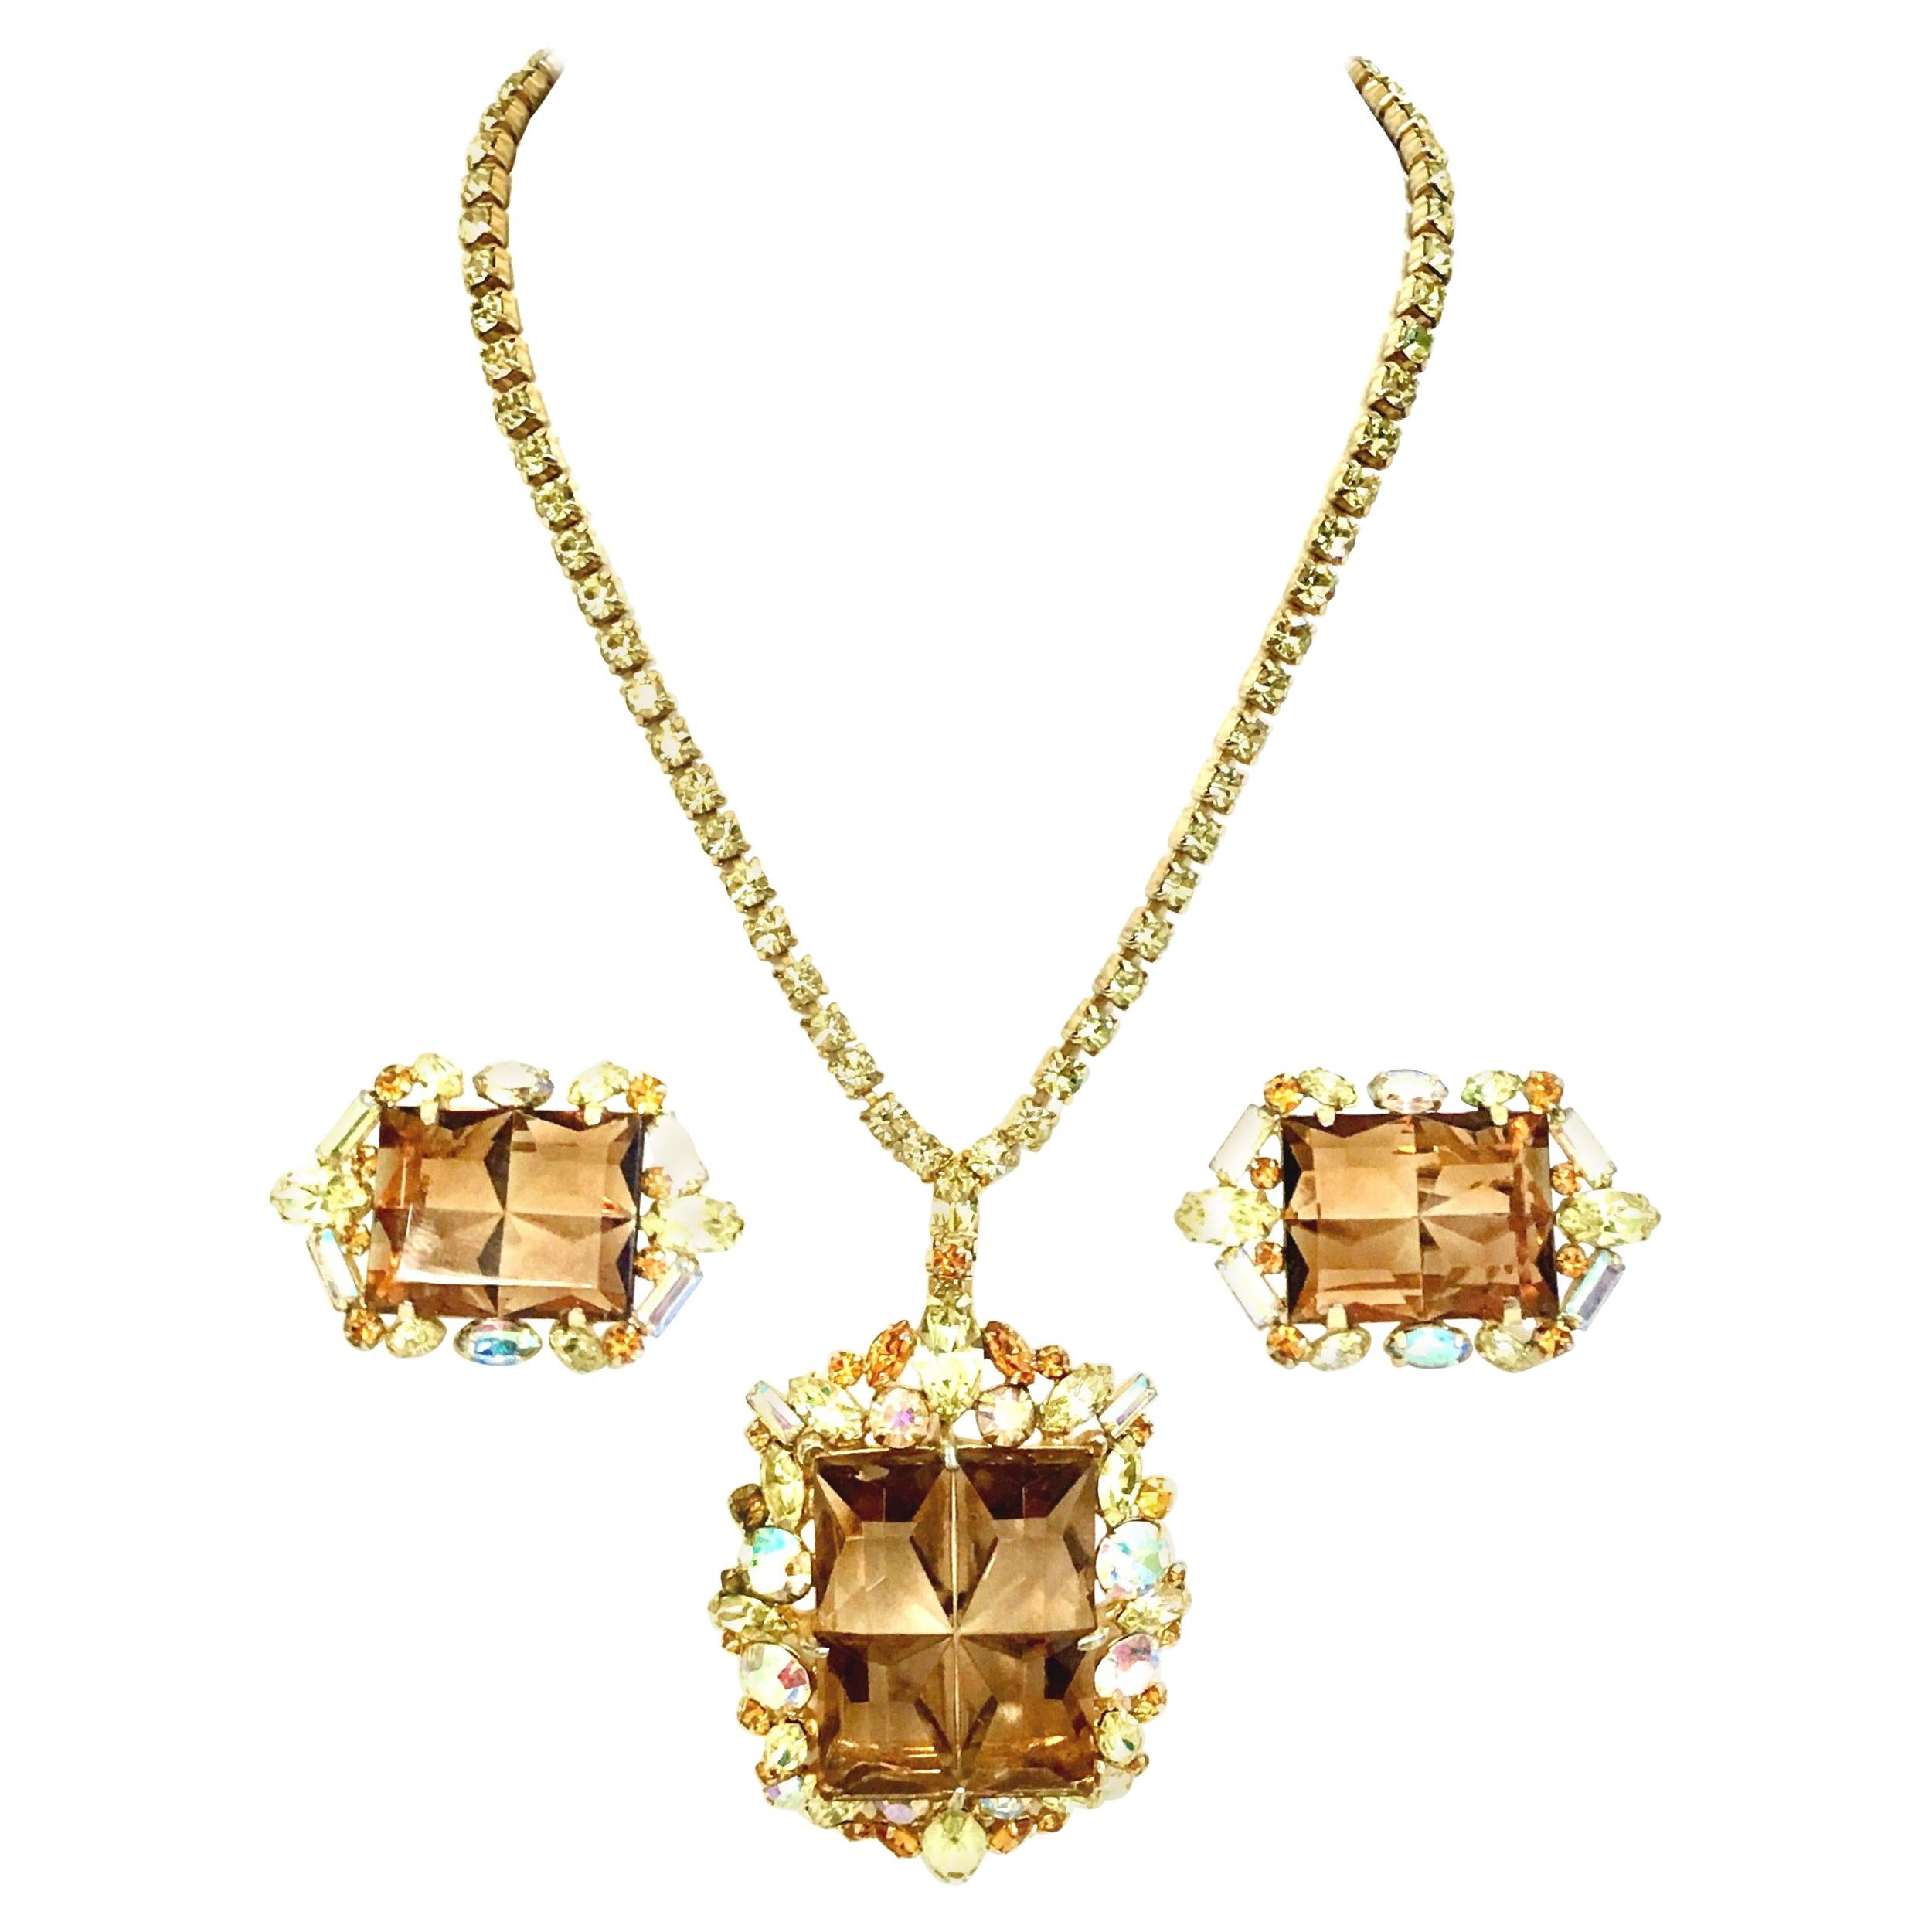 20th Century Gold, Crystal & Glass Demi Parure Necklace & Earrings S/4 For Sale